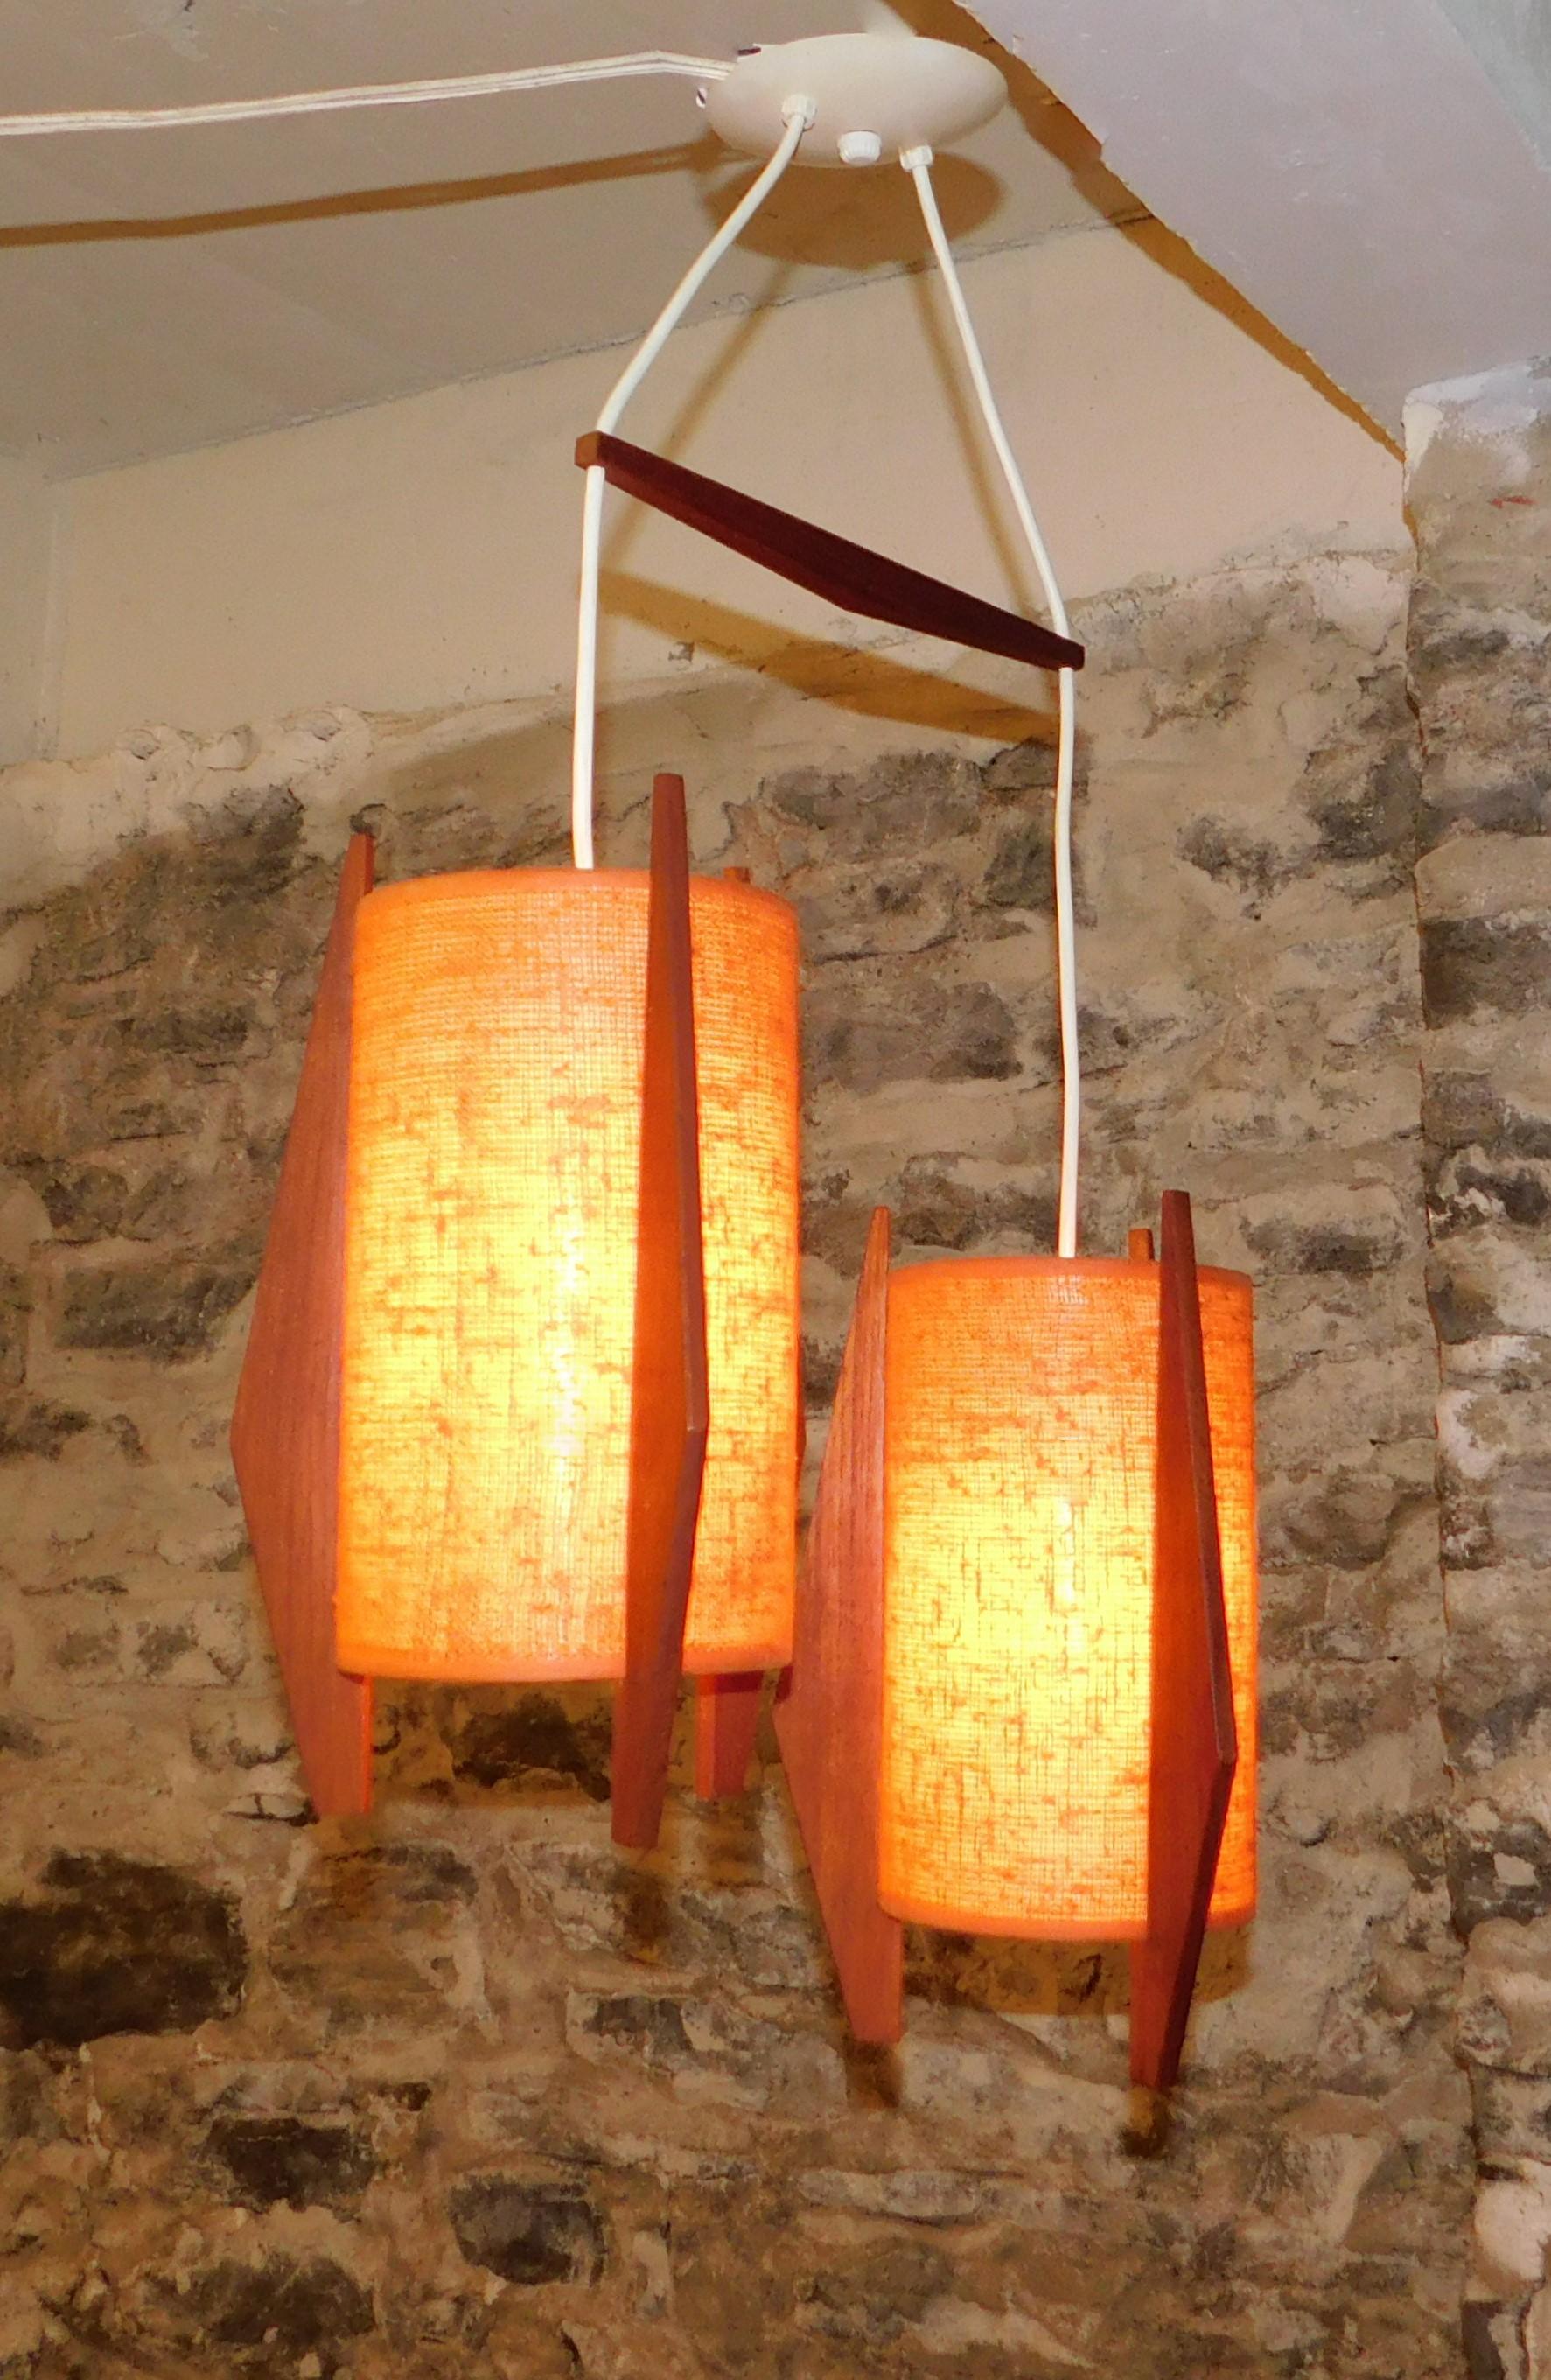 Mid-Century Modern Danish teak and orange fabric hanging double light.
Total height from bottom of light to the top is 31 inches. Each light is 7 inches round X 13.5 inches high.